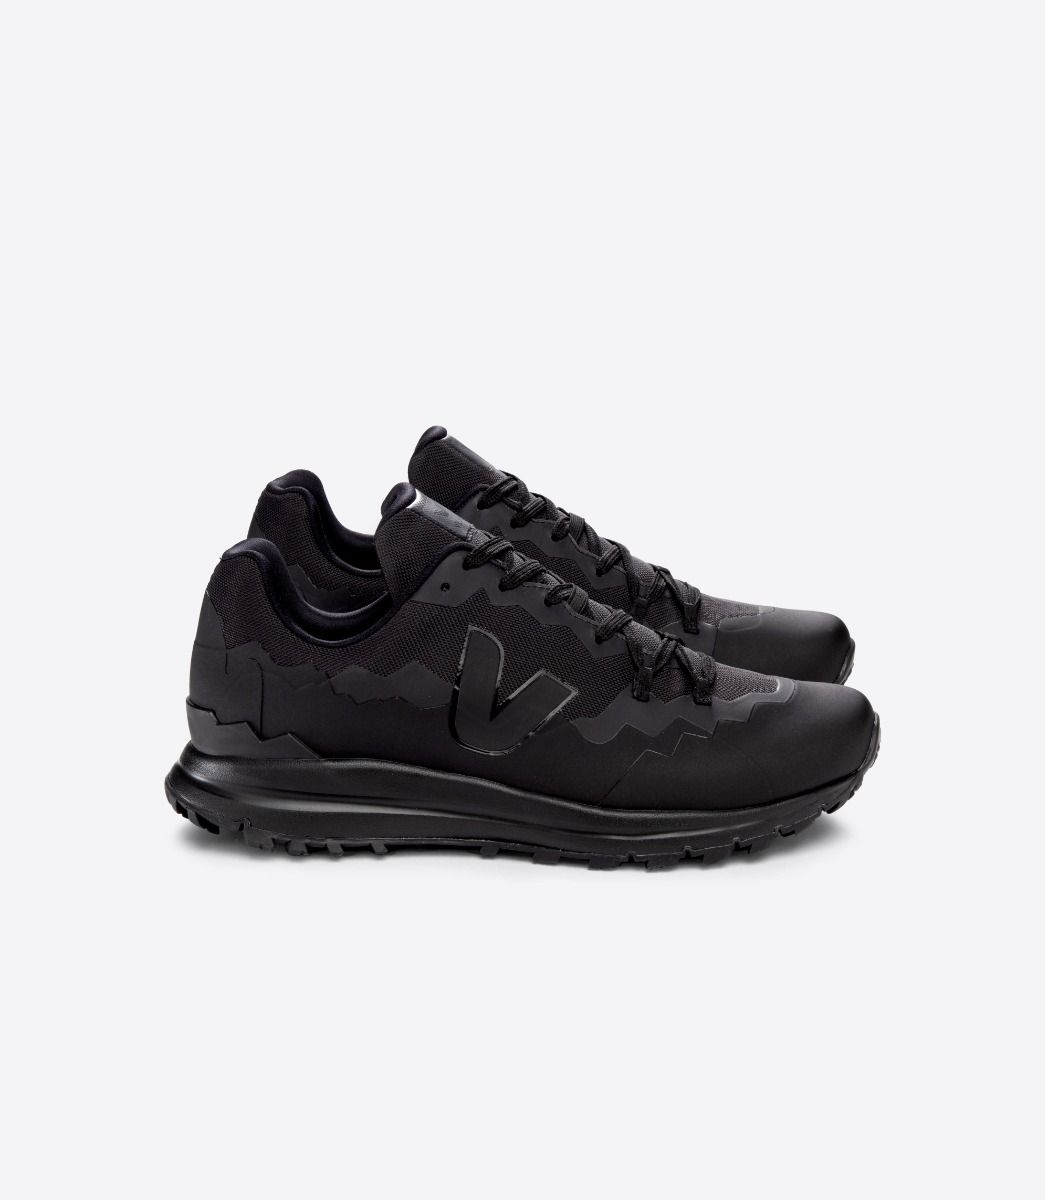 Lateral view of a pair of Men's Fitz Roy Trek shell trail shoes by VEJA in all black